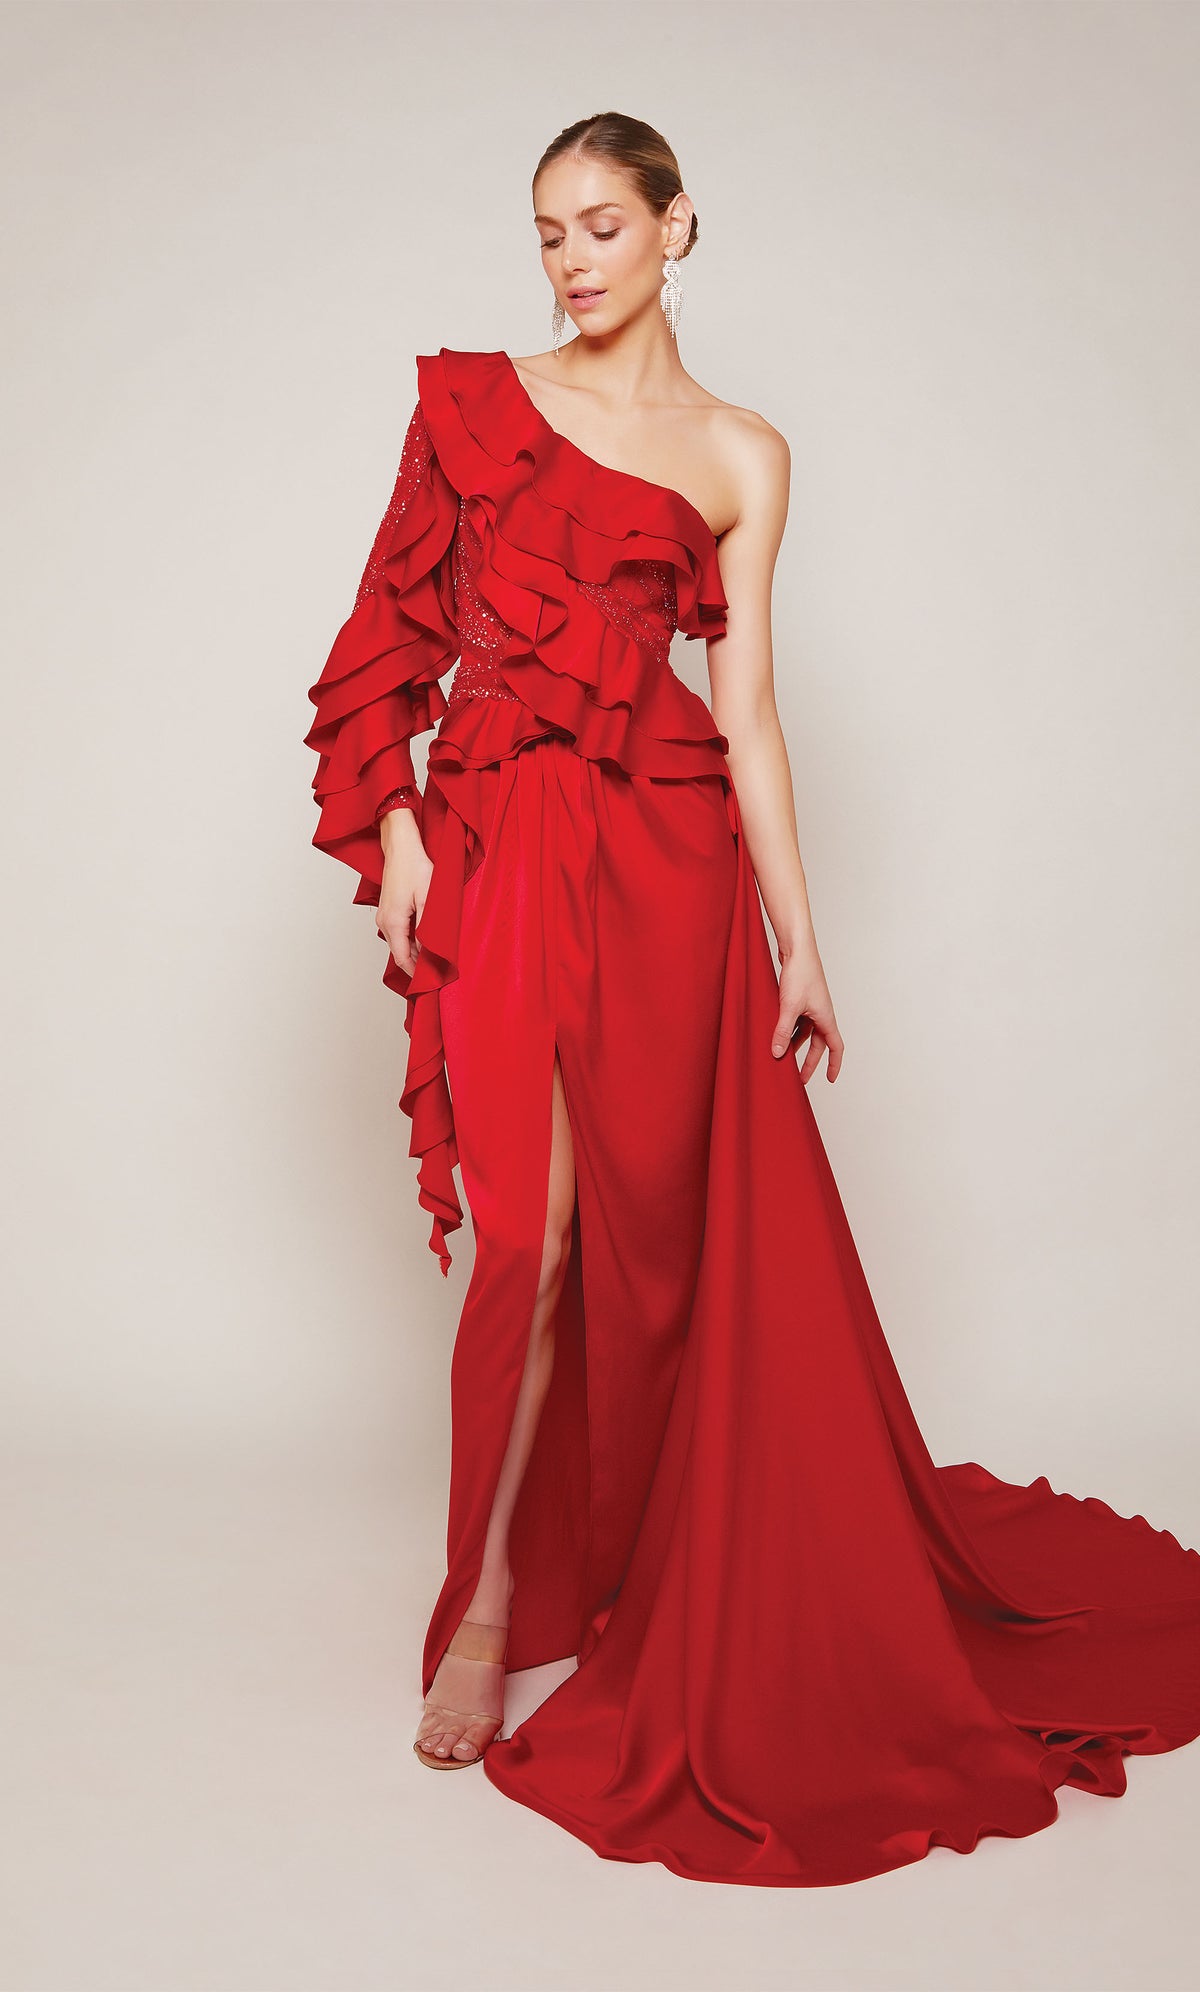 A one shoulder ruffle dress with a front slit and dramatic train in red satin.